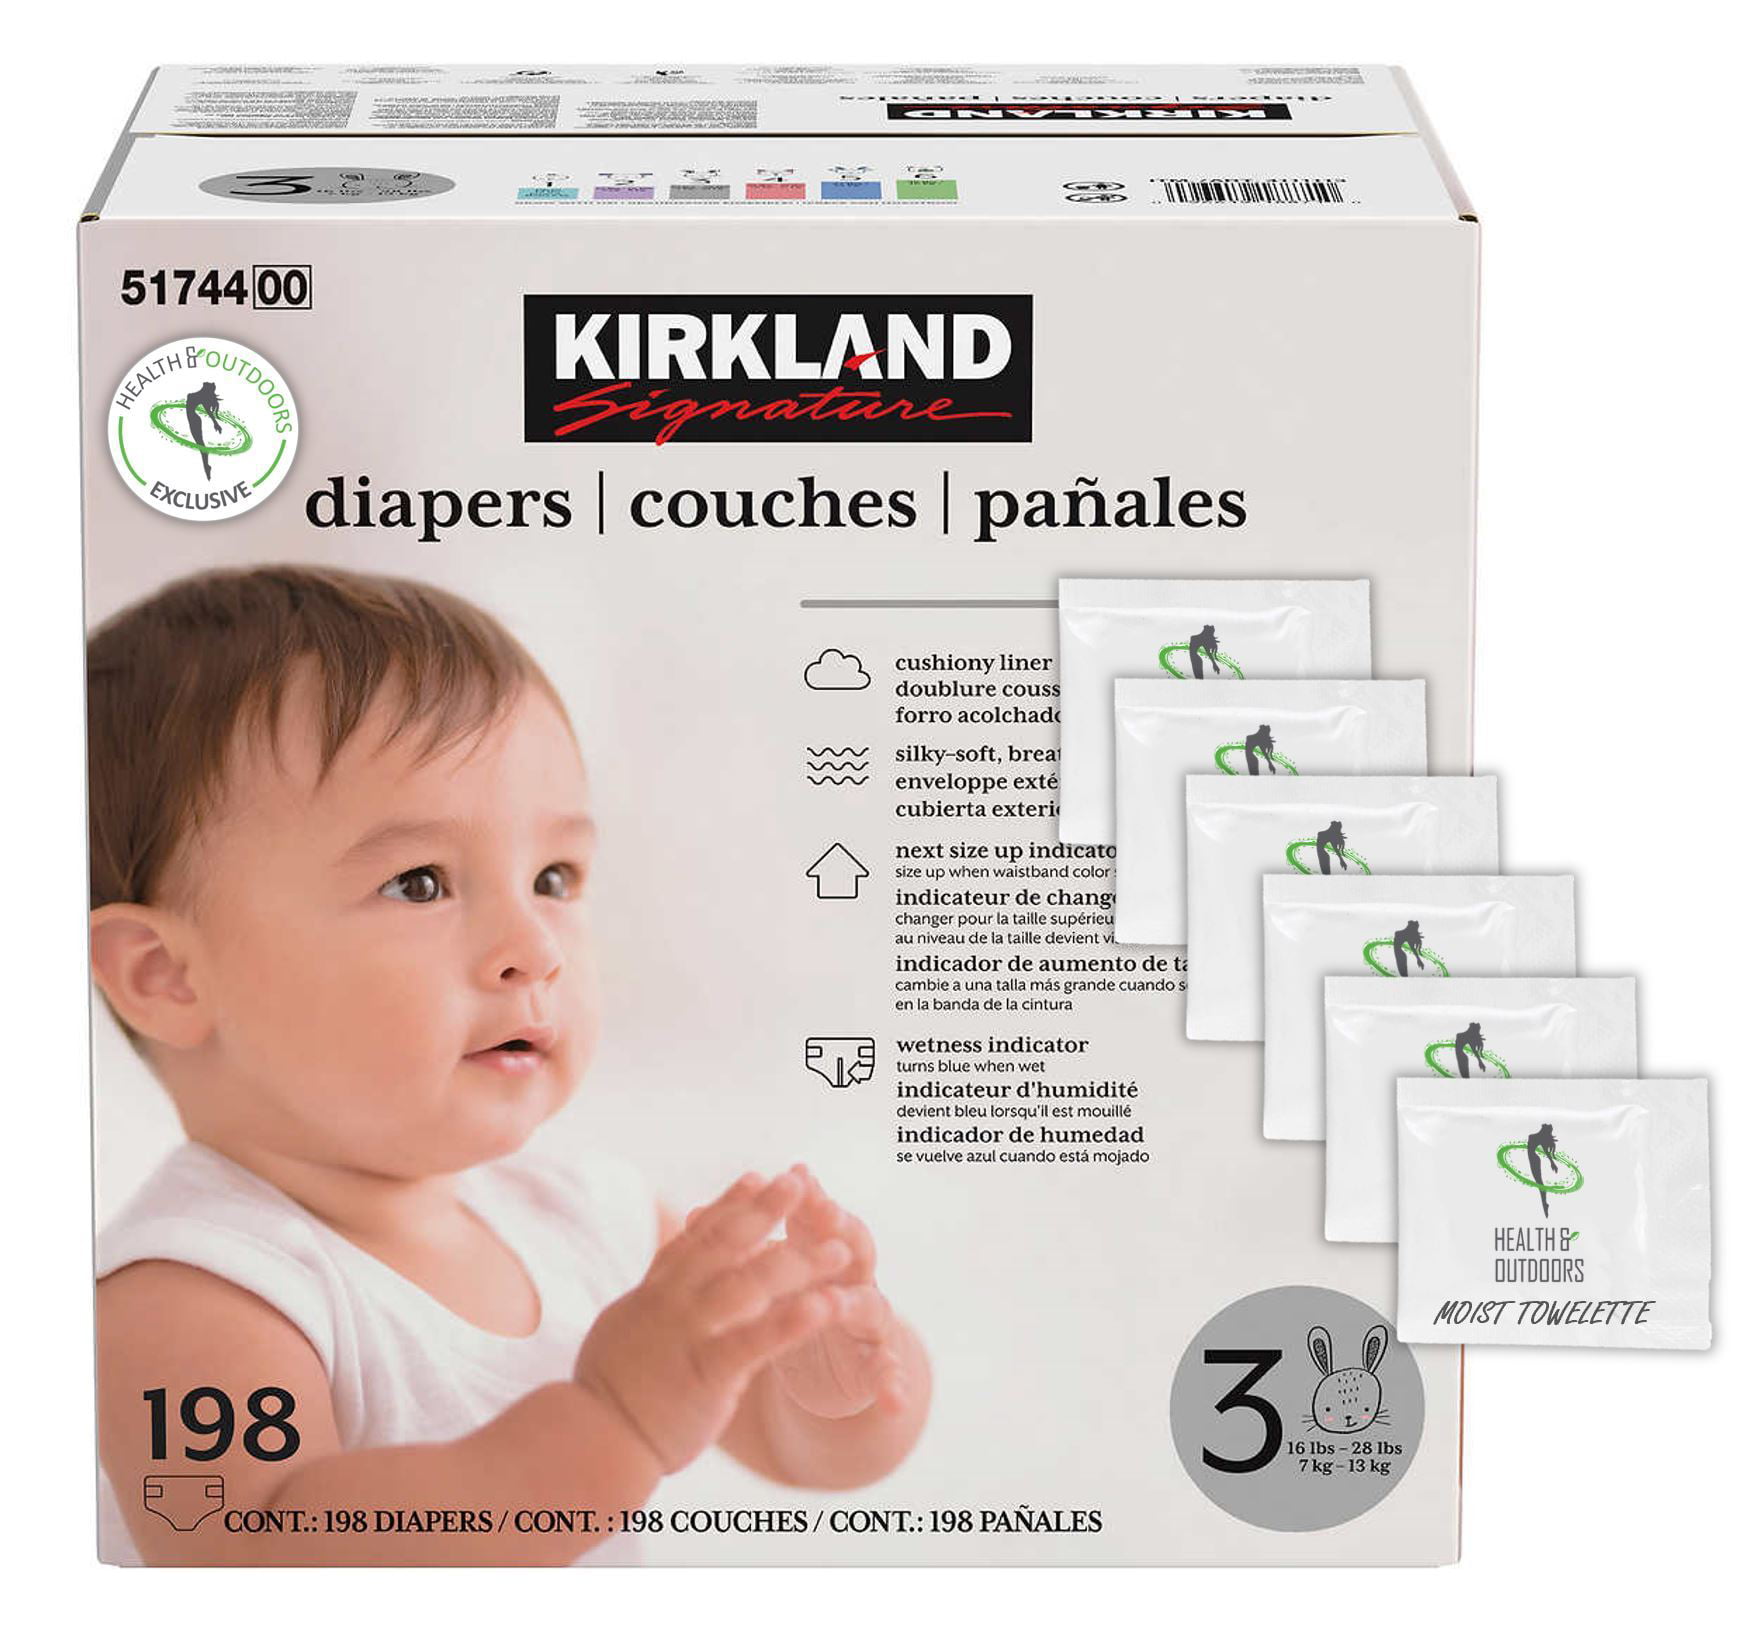 174 Count W/ Exclusive Health and Outdoors Wipes 12lbs - 18 lbs Kirkland Signature Diapers Size 2